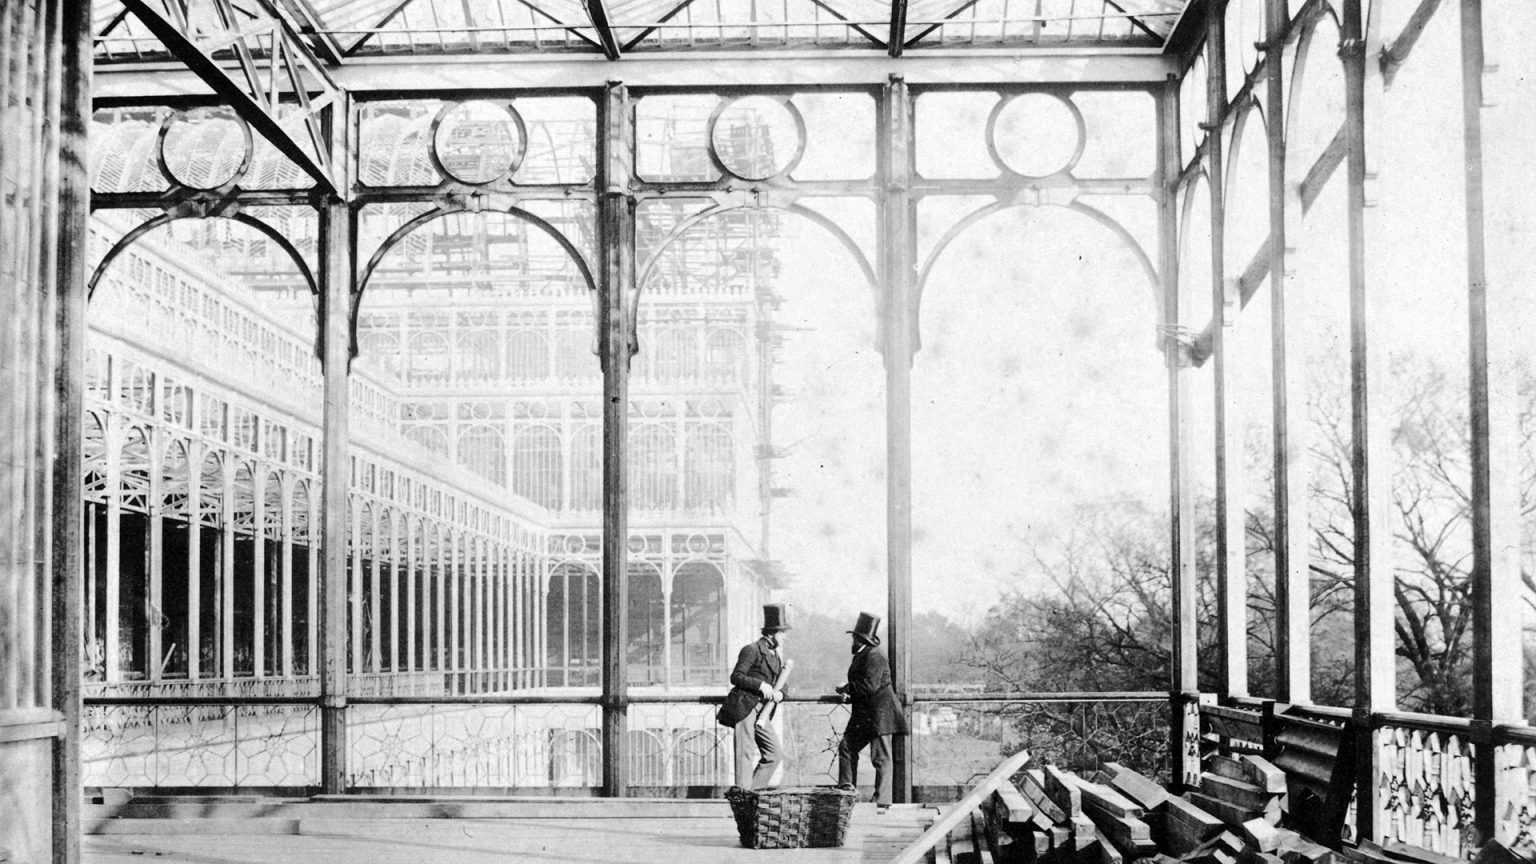 Crystal Palace (Richard Paxton, 1851) (Photograph by Philip Henry Delamotte)